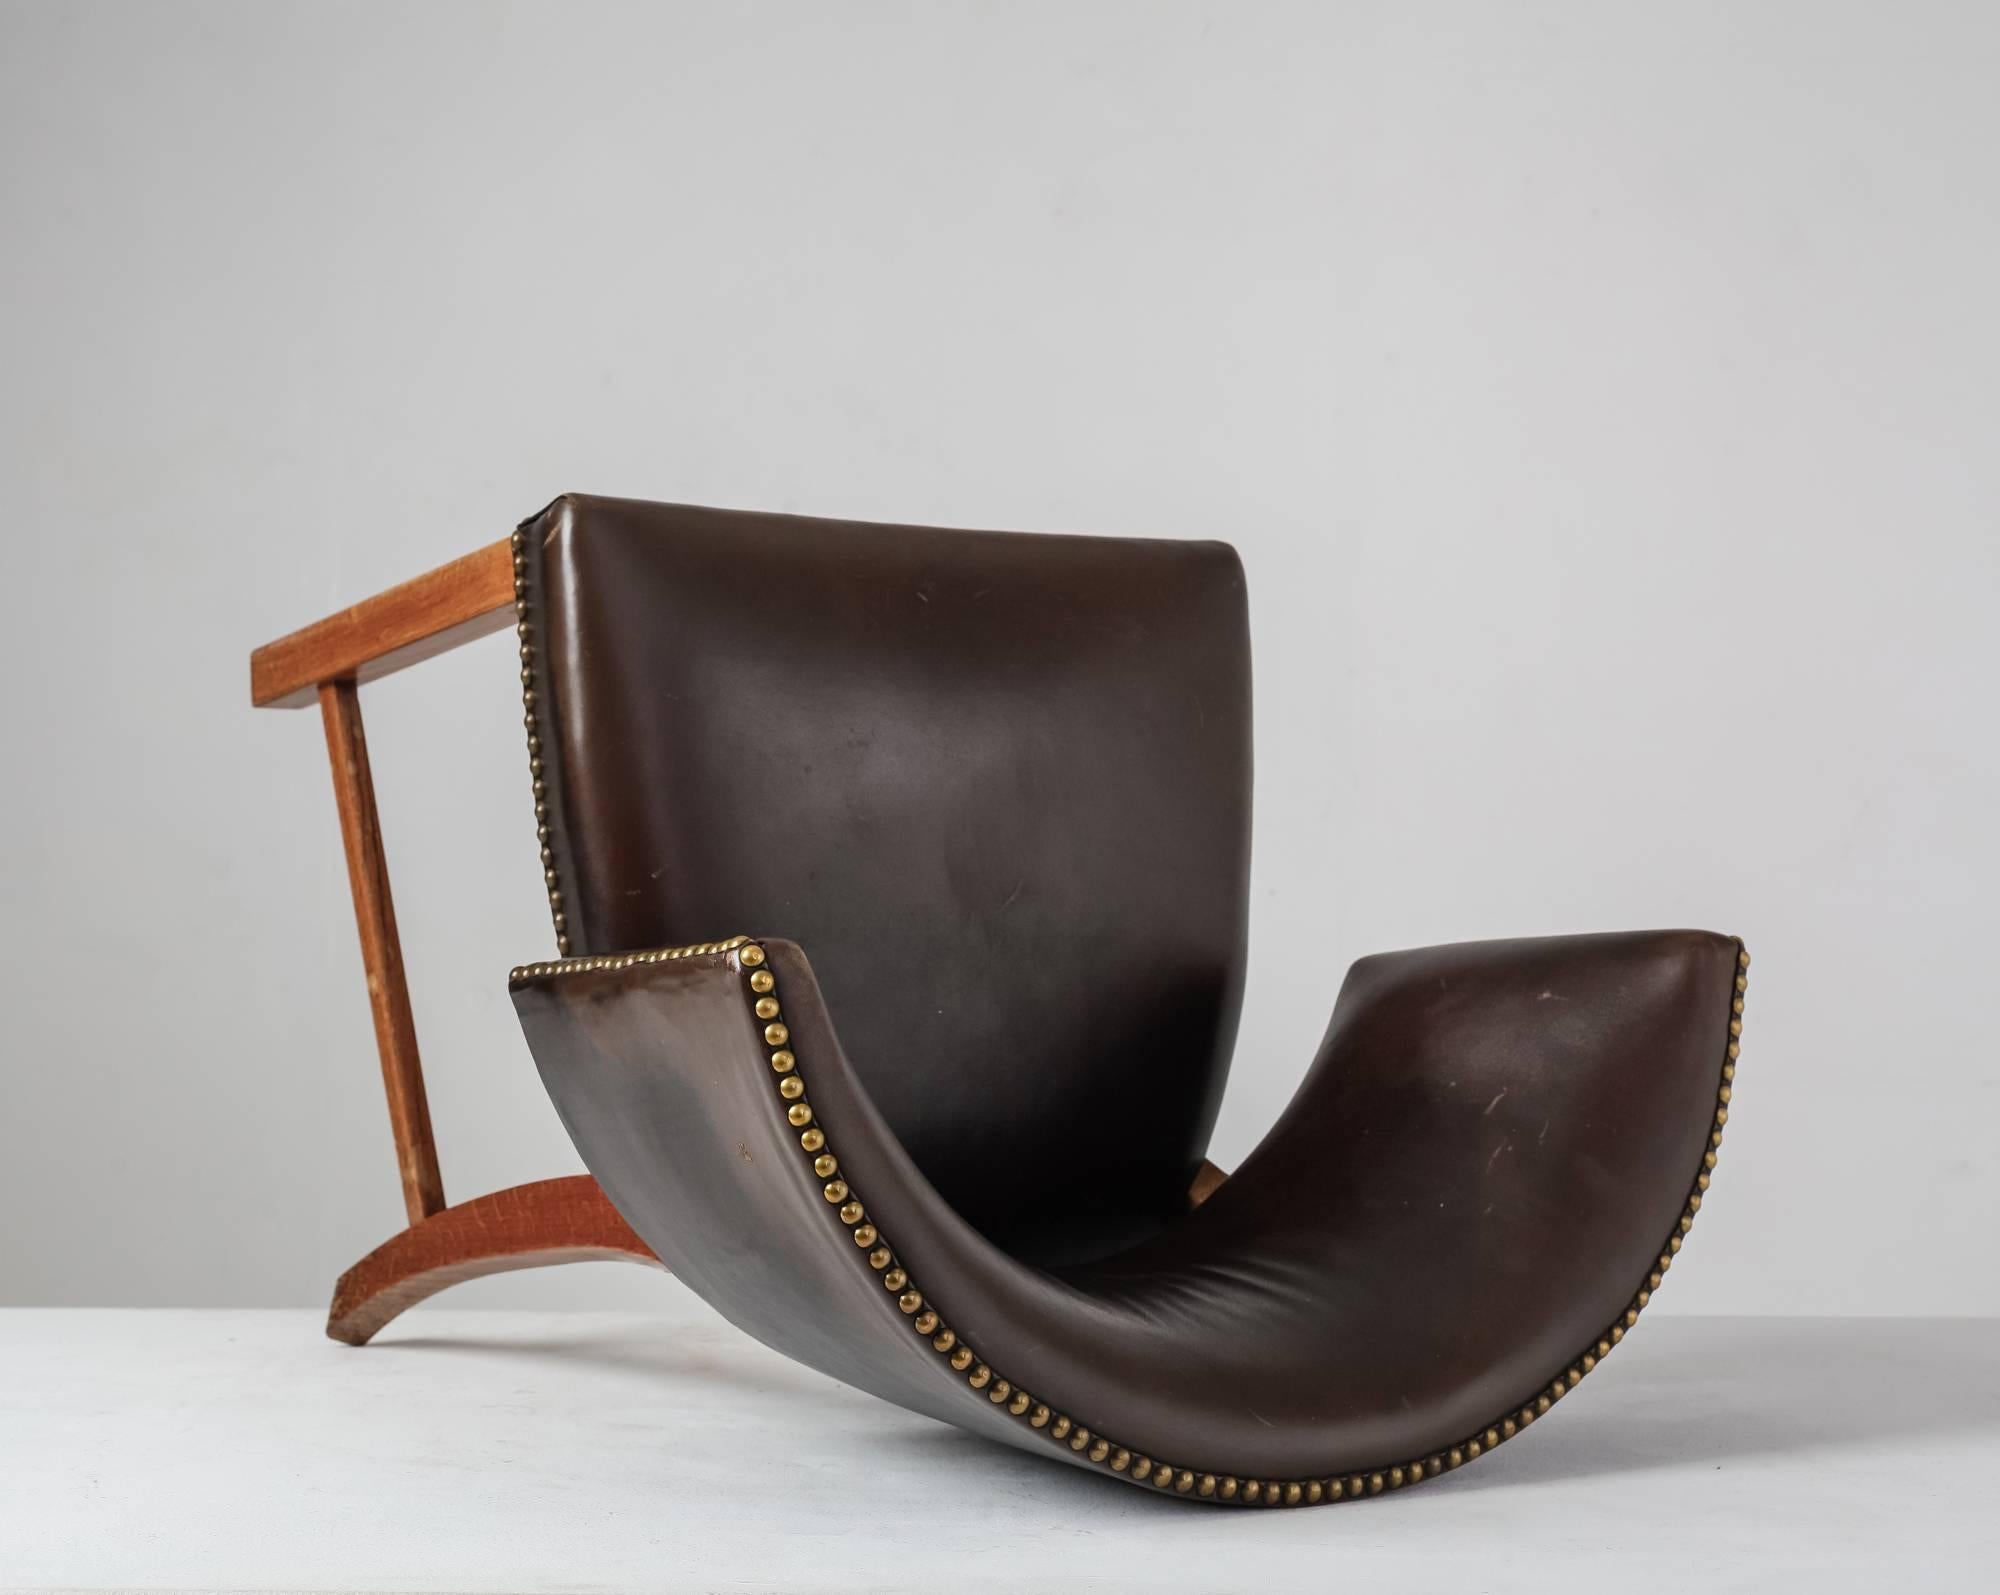 Danish Oak and Leather Sidechair with Large, Curved Backrest, 1930s For Sale 1